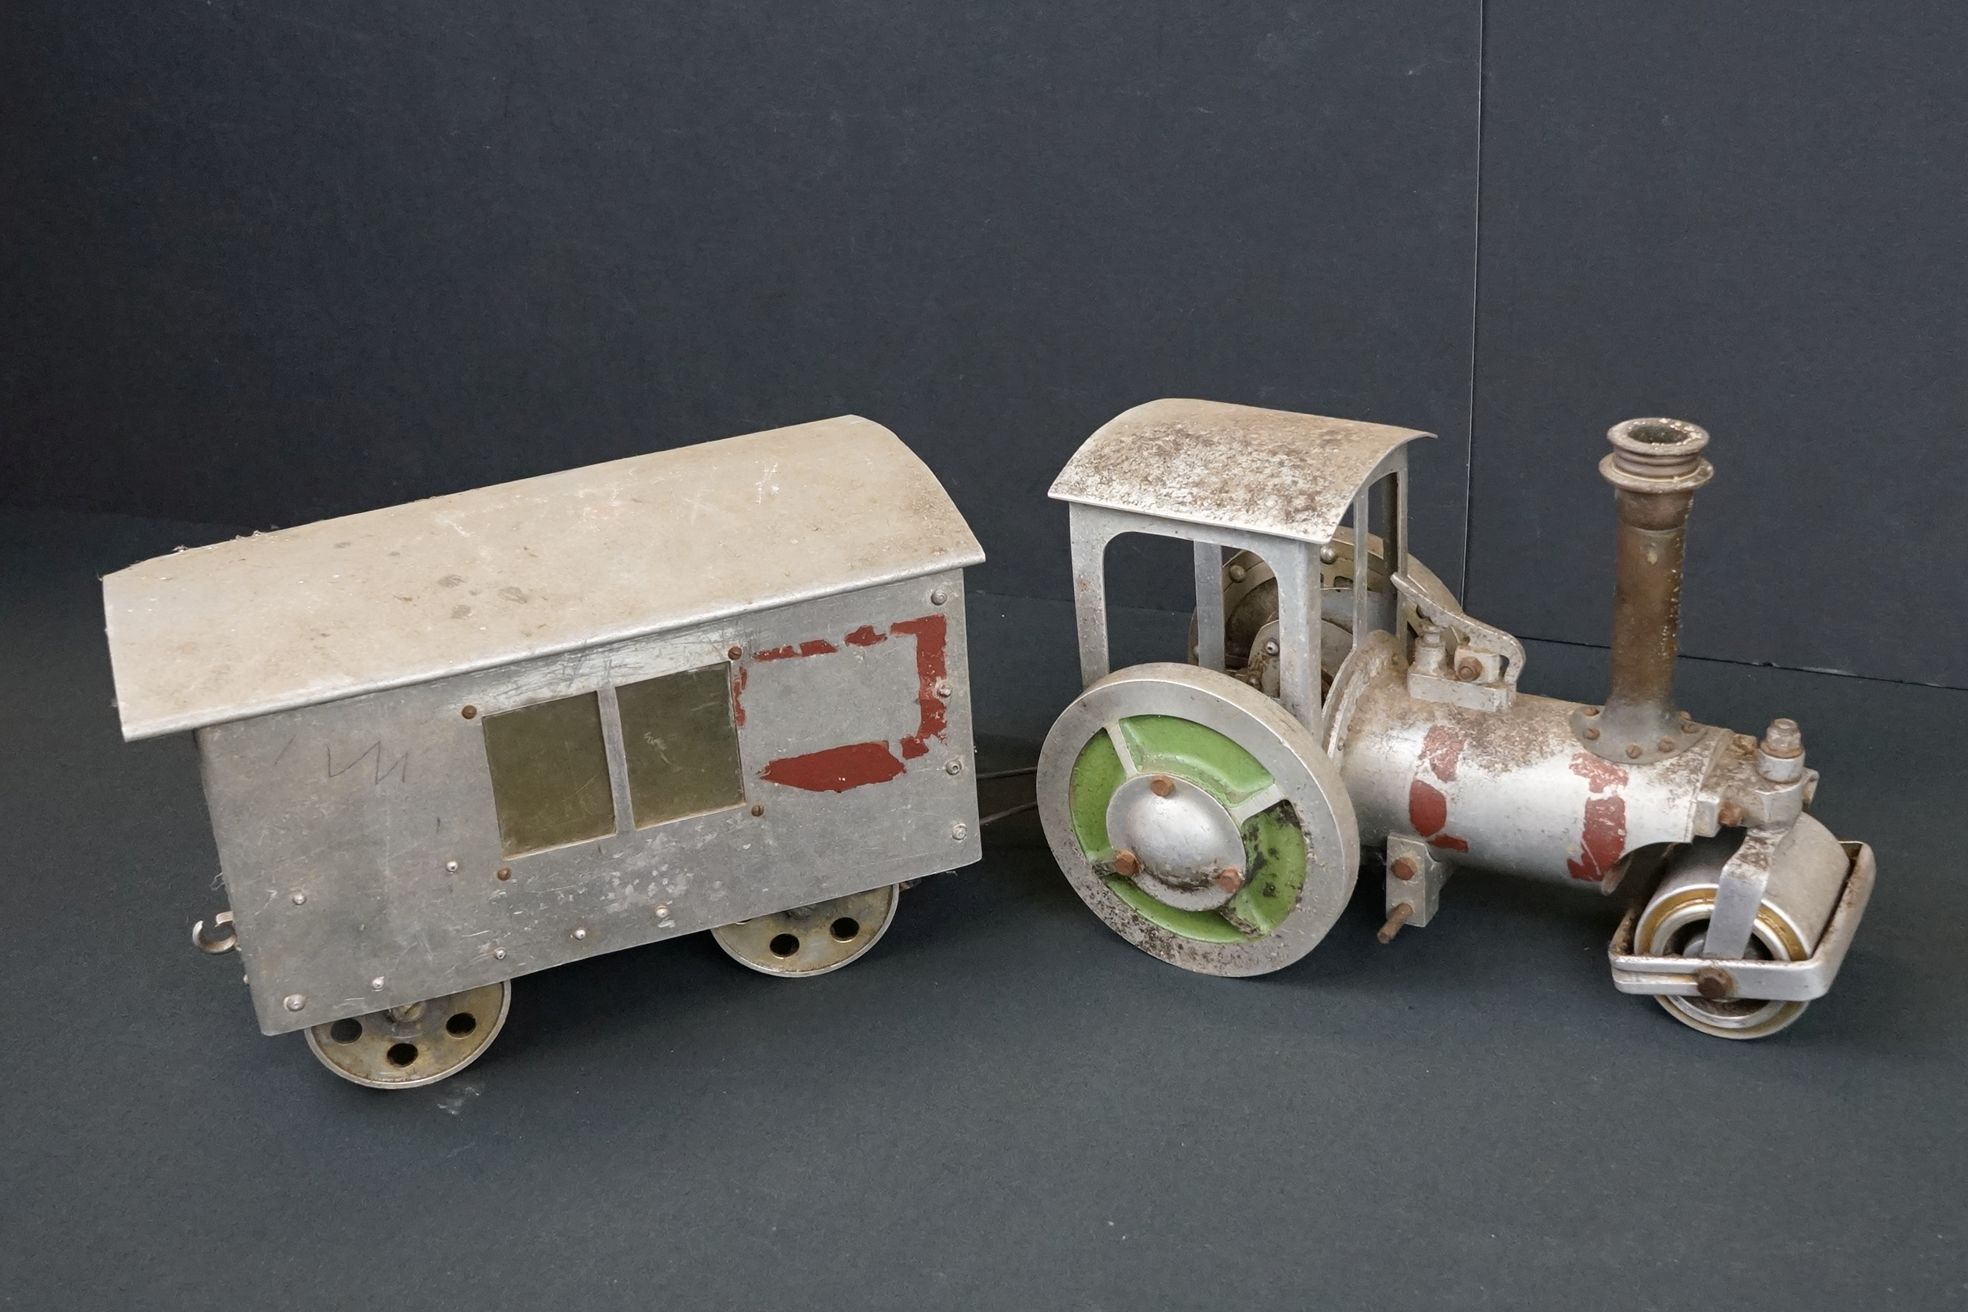 Unbranded metal steam roller engine plus coach, kit/scratch built, showing wear - Image 5 of 7